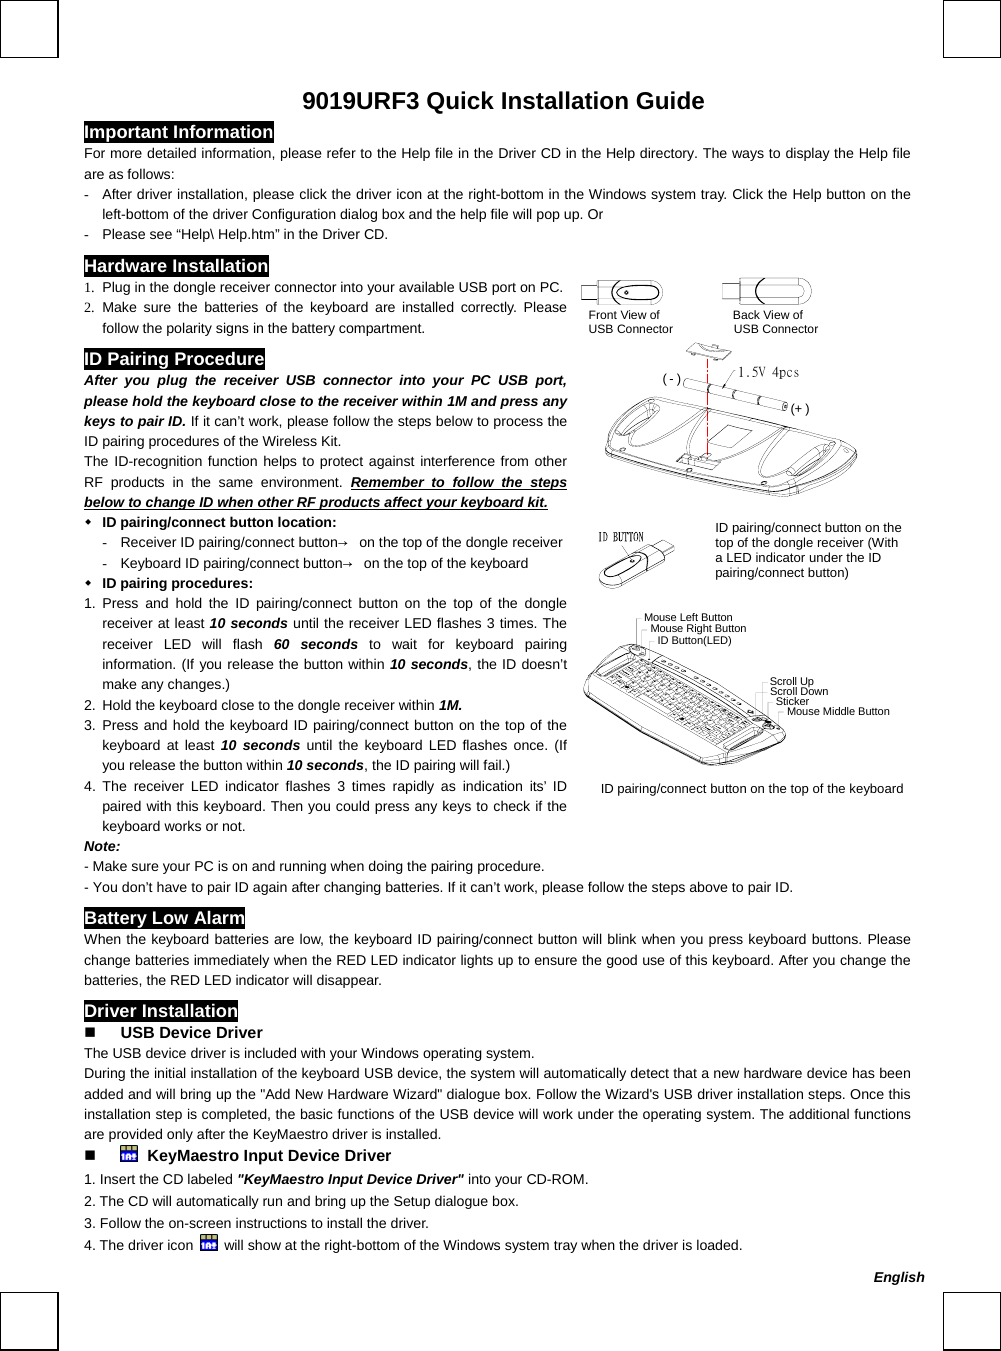     9019URF3 Quick Installation Guide Important Information For more detailed information, please refer to the Help file in the Driver CD in the Help directory. The ways to display the Help file are as follows: -  After driver installation, please click the driver icon at the right-bottom in the Windows system tray. Click the Help button on the left-bottom of the driver Configuration dialog box and the help file will pop up. Or -  Please see “Help\ Help.htm” in the Driver CD. Hardware Installation                Front View of            Back View of  USB Connector          USB Connector      (-)(+ ) 1.  Plug in the dongle receiver connector into your available USB port on PC.2.  Make sure the batteries of the keyboard are installed correctly. Please follow the polarity signs in the battery compartment. ID Pairing Procedure After you plug the receiver USB connector into your PC USB port, please hold the keyboard close to the receiver within 1M and press any keys to pair ID. If it can’t work, please follow the steps below to process the ID pairing procedures of the Wireless Kit. The ID-recognition function helps to protect against interference from other RF products in the same environment. Remember to follow the steps below to change ID when other RF products affect your keyboard kit.  ID pairing/connect button location: -  Receiver ID pairing/connect button→  on the top of the dongle receiver-  Keyboard ID pairing/connect button→  on the top of the keyboard  ID pairing procedures: 1. Press and hold the ID pairing/connect button on the top of the dongle receiver at least 10 seconds until the receiver LED flashes 3 times. The receiver LED will flash 60 seconds to wait for keyboard pairing information. (If you release the button within 10 seconds, the ID doesn’t make any changes.) 2.  Hold the keyboard close to the dongle receiver within 1M. 3. Press and hold the keyboard ID pairing/connect button on the top of the keyboard at least 10 seconds until the keyboard LED flashes once. (If you release the button within 10 seconds, the ID pairing will fail.) 4. The receiver LED indicator flashes 3 times rapidly as indication its’ ID paired with this keyboard. Then you could press any keys to check if the keyboard works or not.     Mouse Middle ButtonMouse Right ButtonMouse Left ButtonScroll DownScroll UpStickerID Button(LED) Note: - Make sure your PC is on and running when doing the pairing procedure. - You don’t have to pair ID again after changing batteries. If it can’t work, please follow the steps above to pair ID. Battery Low Alarm When the keyboard batteries are low, the keyboard ID pairing/connect button will blink when you press keyboard buttons. Please change batteries immediately when the RED LED indicator lights up to ensure the good use of this keyboard. After you change the batteries, the RED LED indicator will disappear. Driver Installation   USB Device Driver The USB device driver is included with your Windows operating system.     During the initial installation of the keyboard USB device, the system will automatically detect that a new hardware device has been added and will bring up the &quot;Add New Hardware Wizard&quot; dialogue box. Follow the Wizard&apos;s USB driver installation steps. Once this installation step is completed, the basic functions of the USB device will work under the operating system. The additional functions are provided only after the KeyMaestro driver is installed.    KeyMaestro Input Device Driver 1. Insert the CD labeled &quot;KeyMaestro Input Device Driver&quot; into your CD-ROM. 2. The CD will automatically run and bring up the Setup dialogue box. 3. Follow the on-screen instructions to install the driver. 4. The driver icon    will show at the right-bottom of the Windows system tray when the driver is loaded. ID pairing/connect button on the top of the keyboard ID pairing/connect button on the top of the dongle receiver (With a LED indicator under the ID pairing/connect button) English